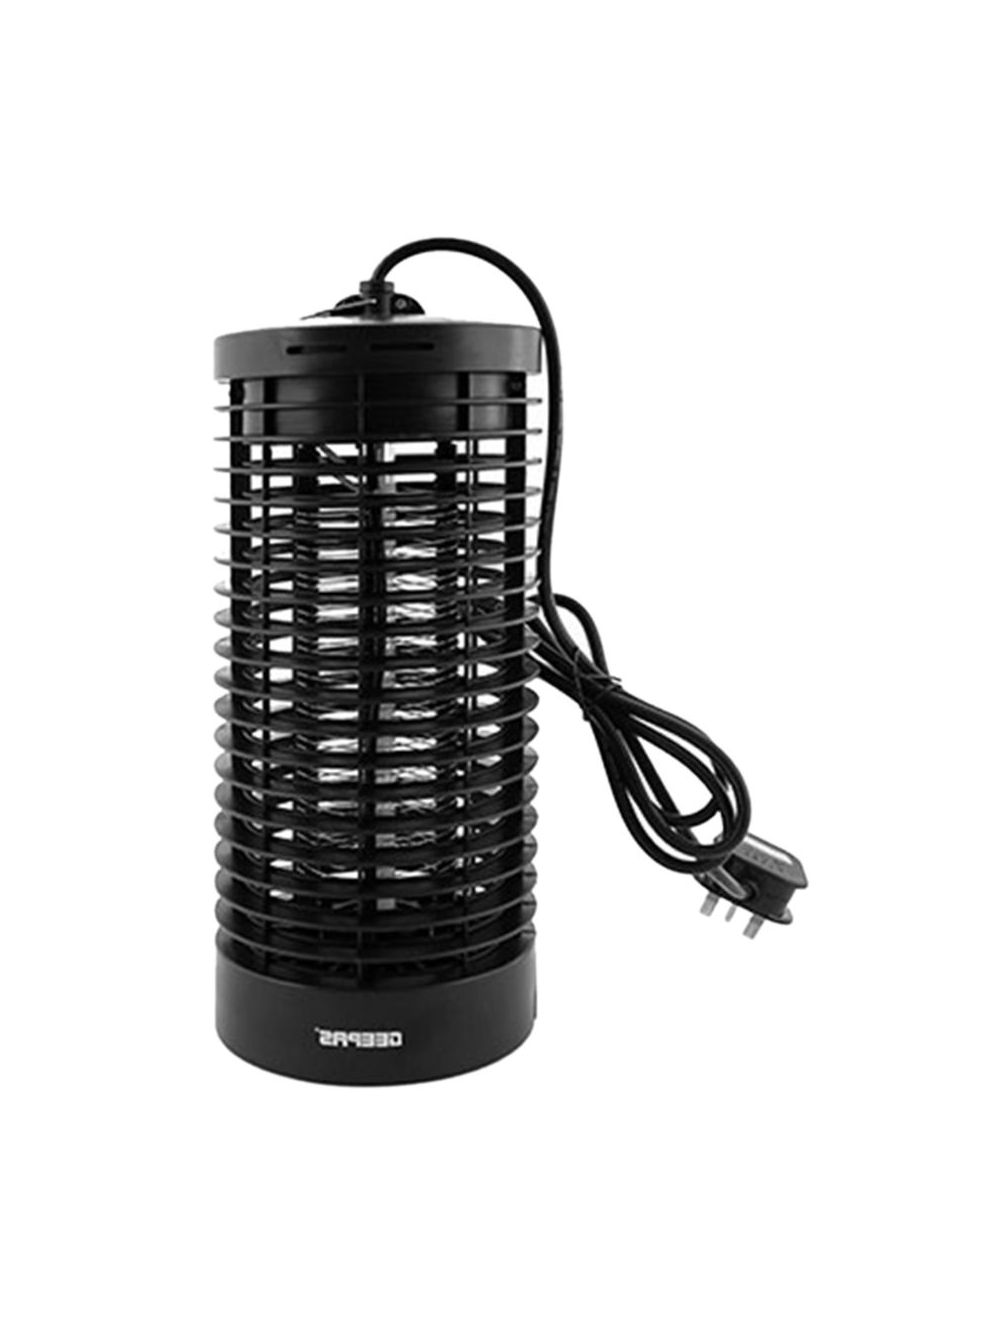 Geepas Electric Insect Killer 6W GBK1149 Black